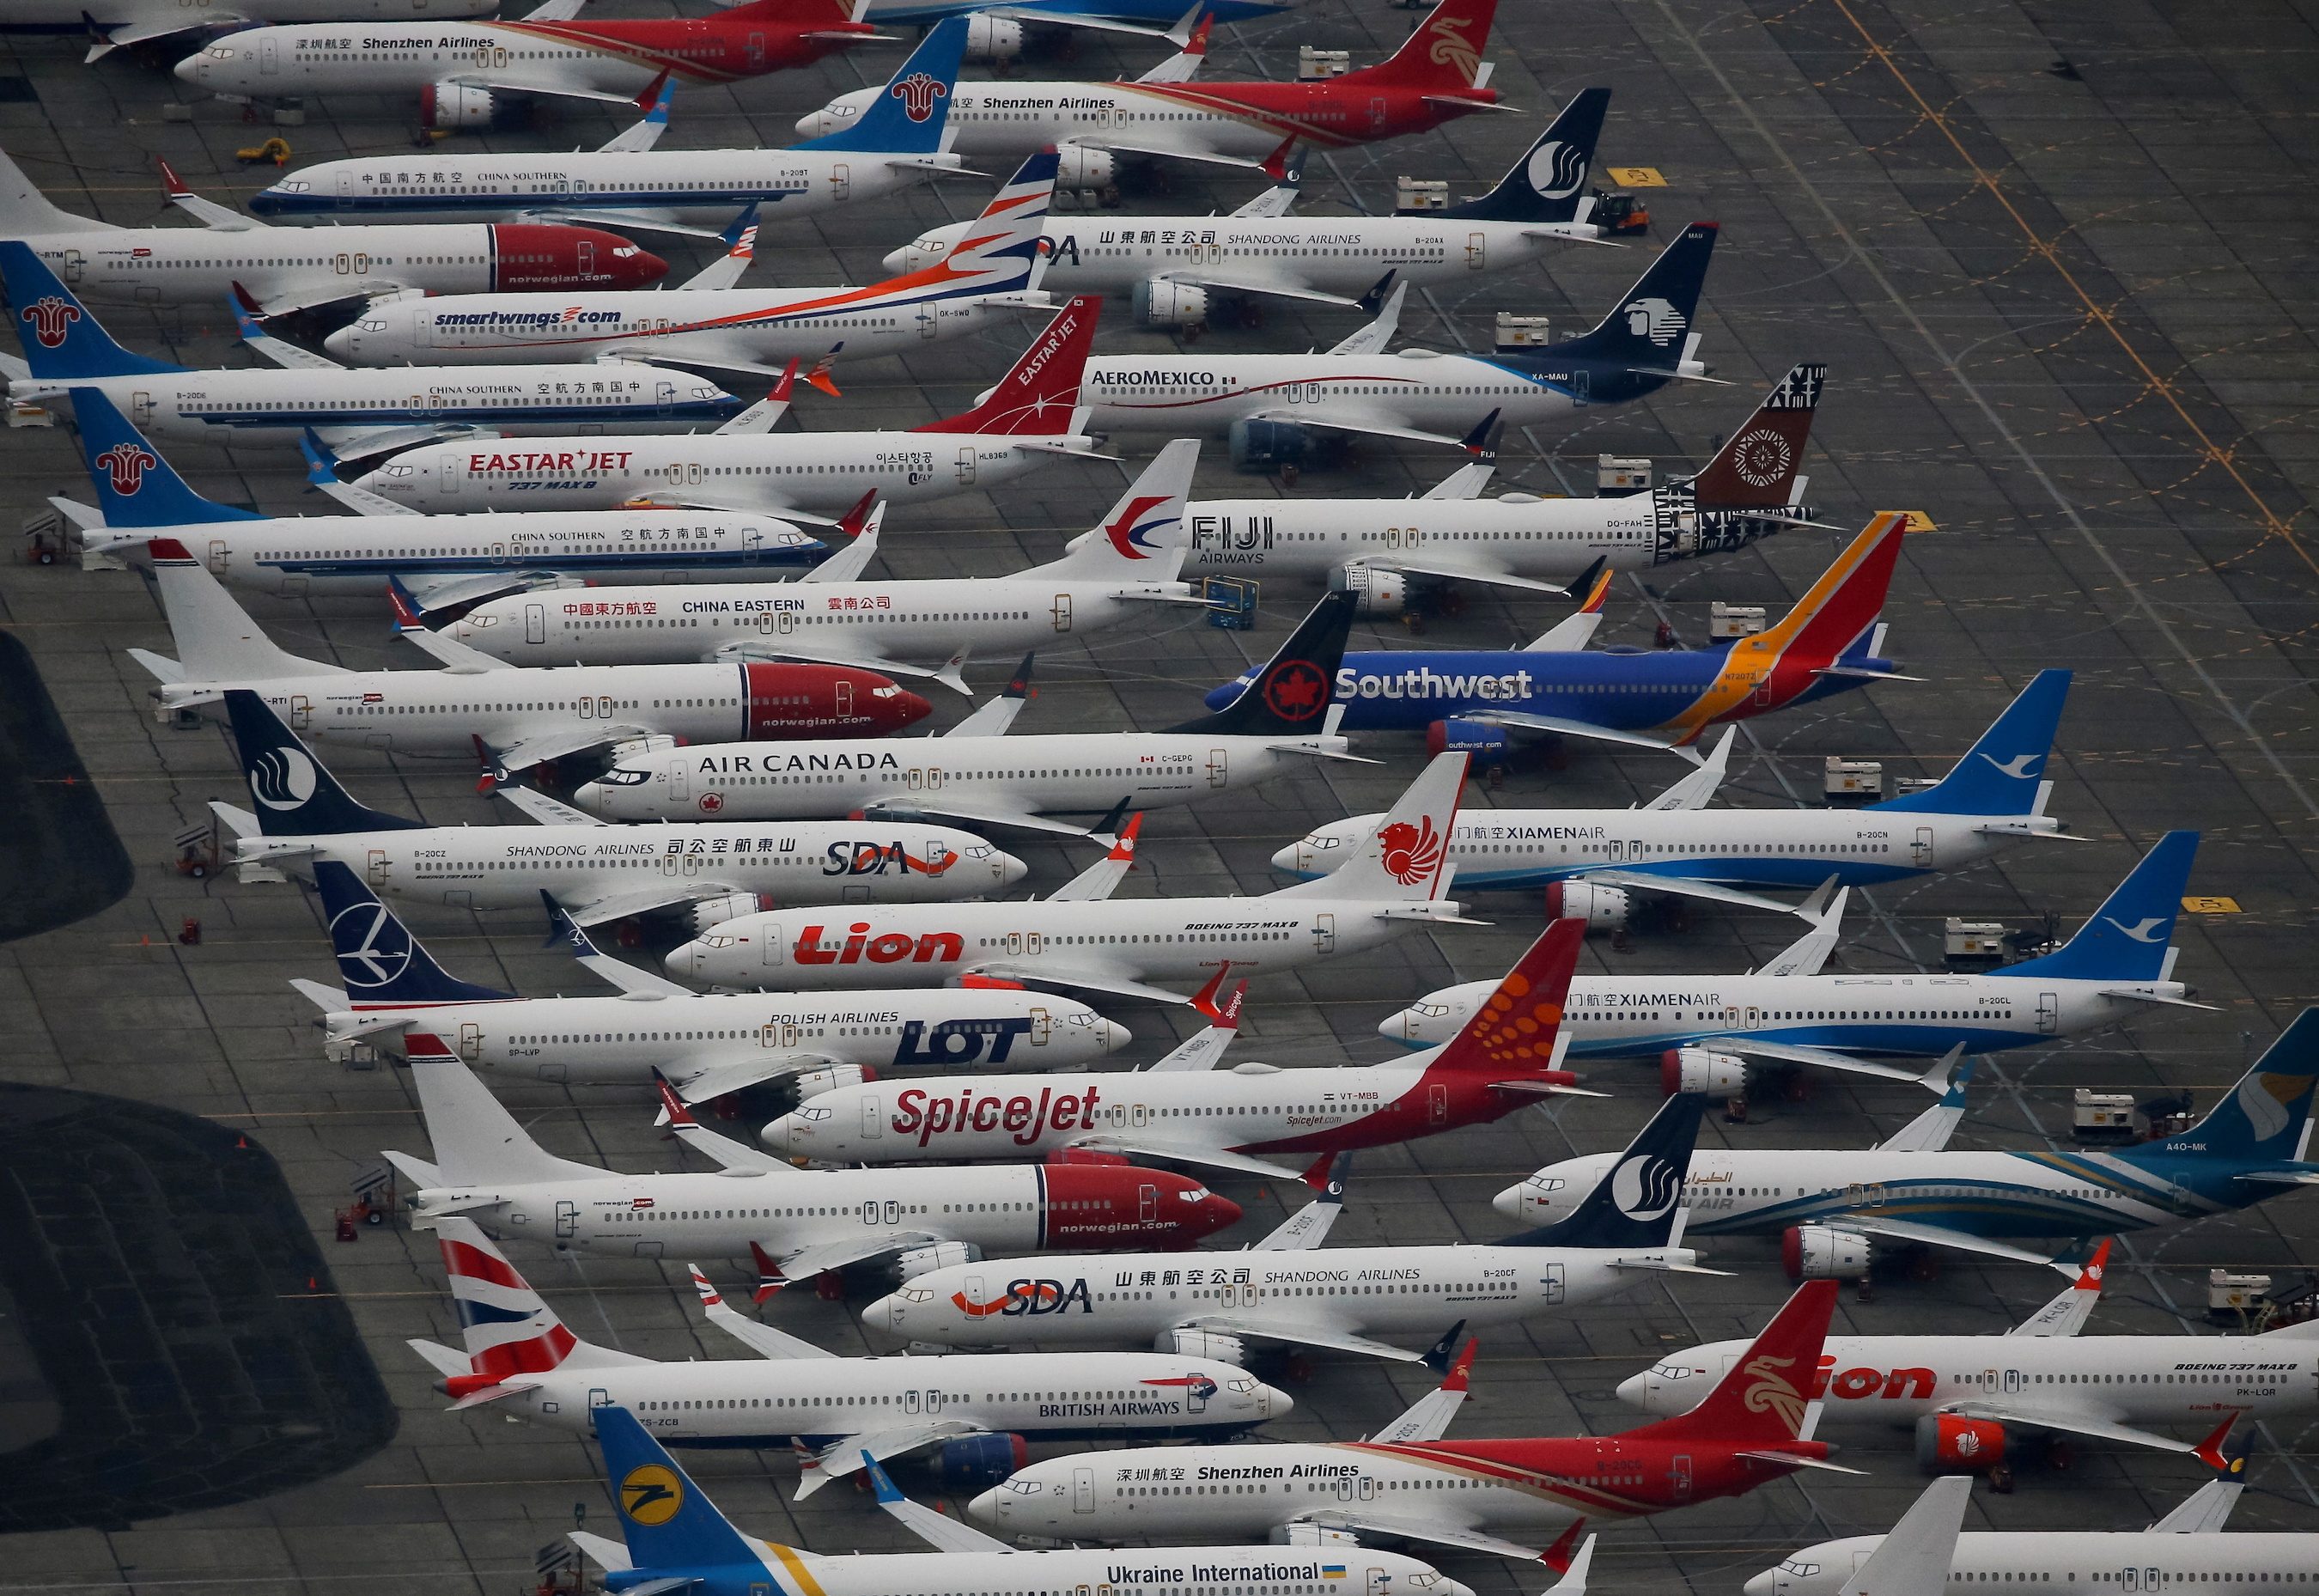 Shareholders may pursue 737 MAX claims against Boeing board, court rules